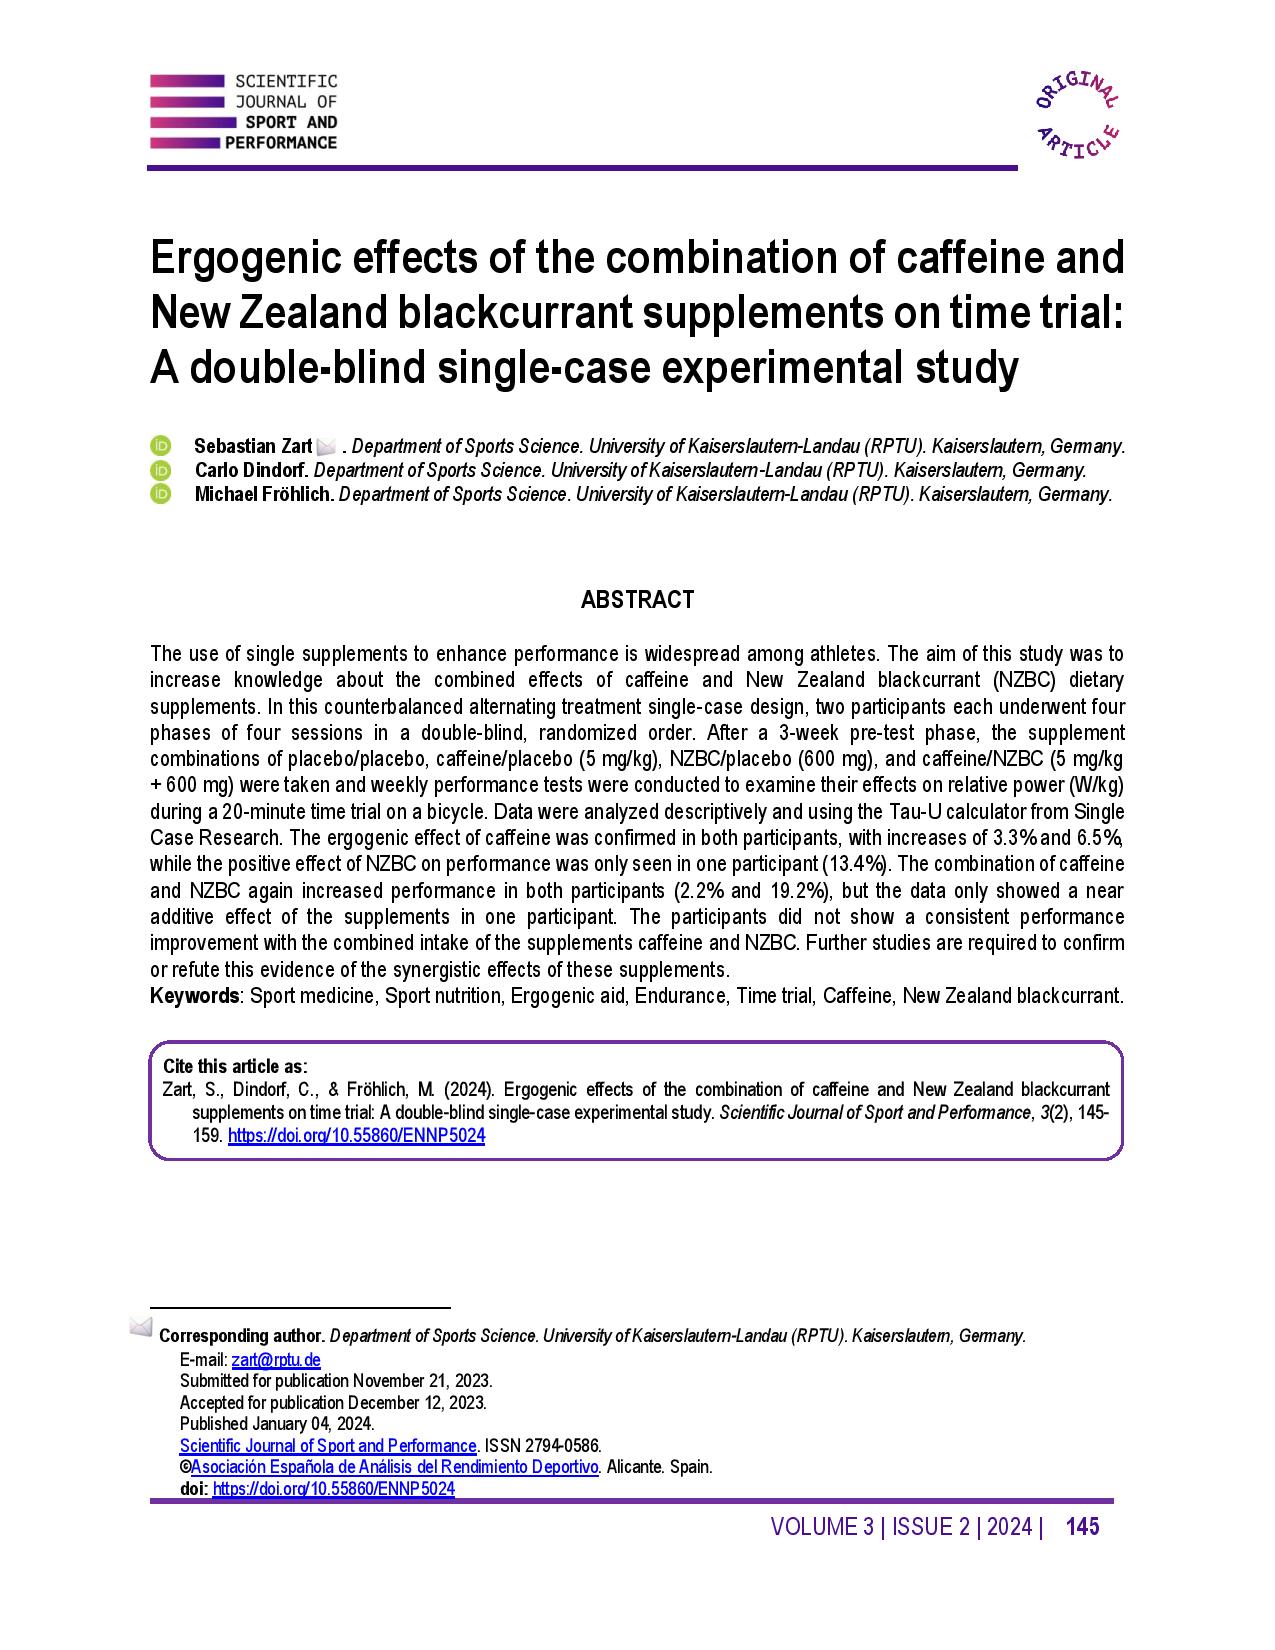 Ergogenic effects of the combination of caffeine and New Zealand blackcurrant supplements on time trial: A double-blind single-case experimental study